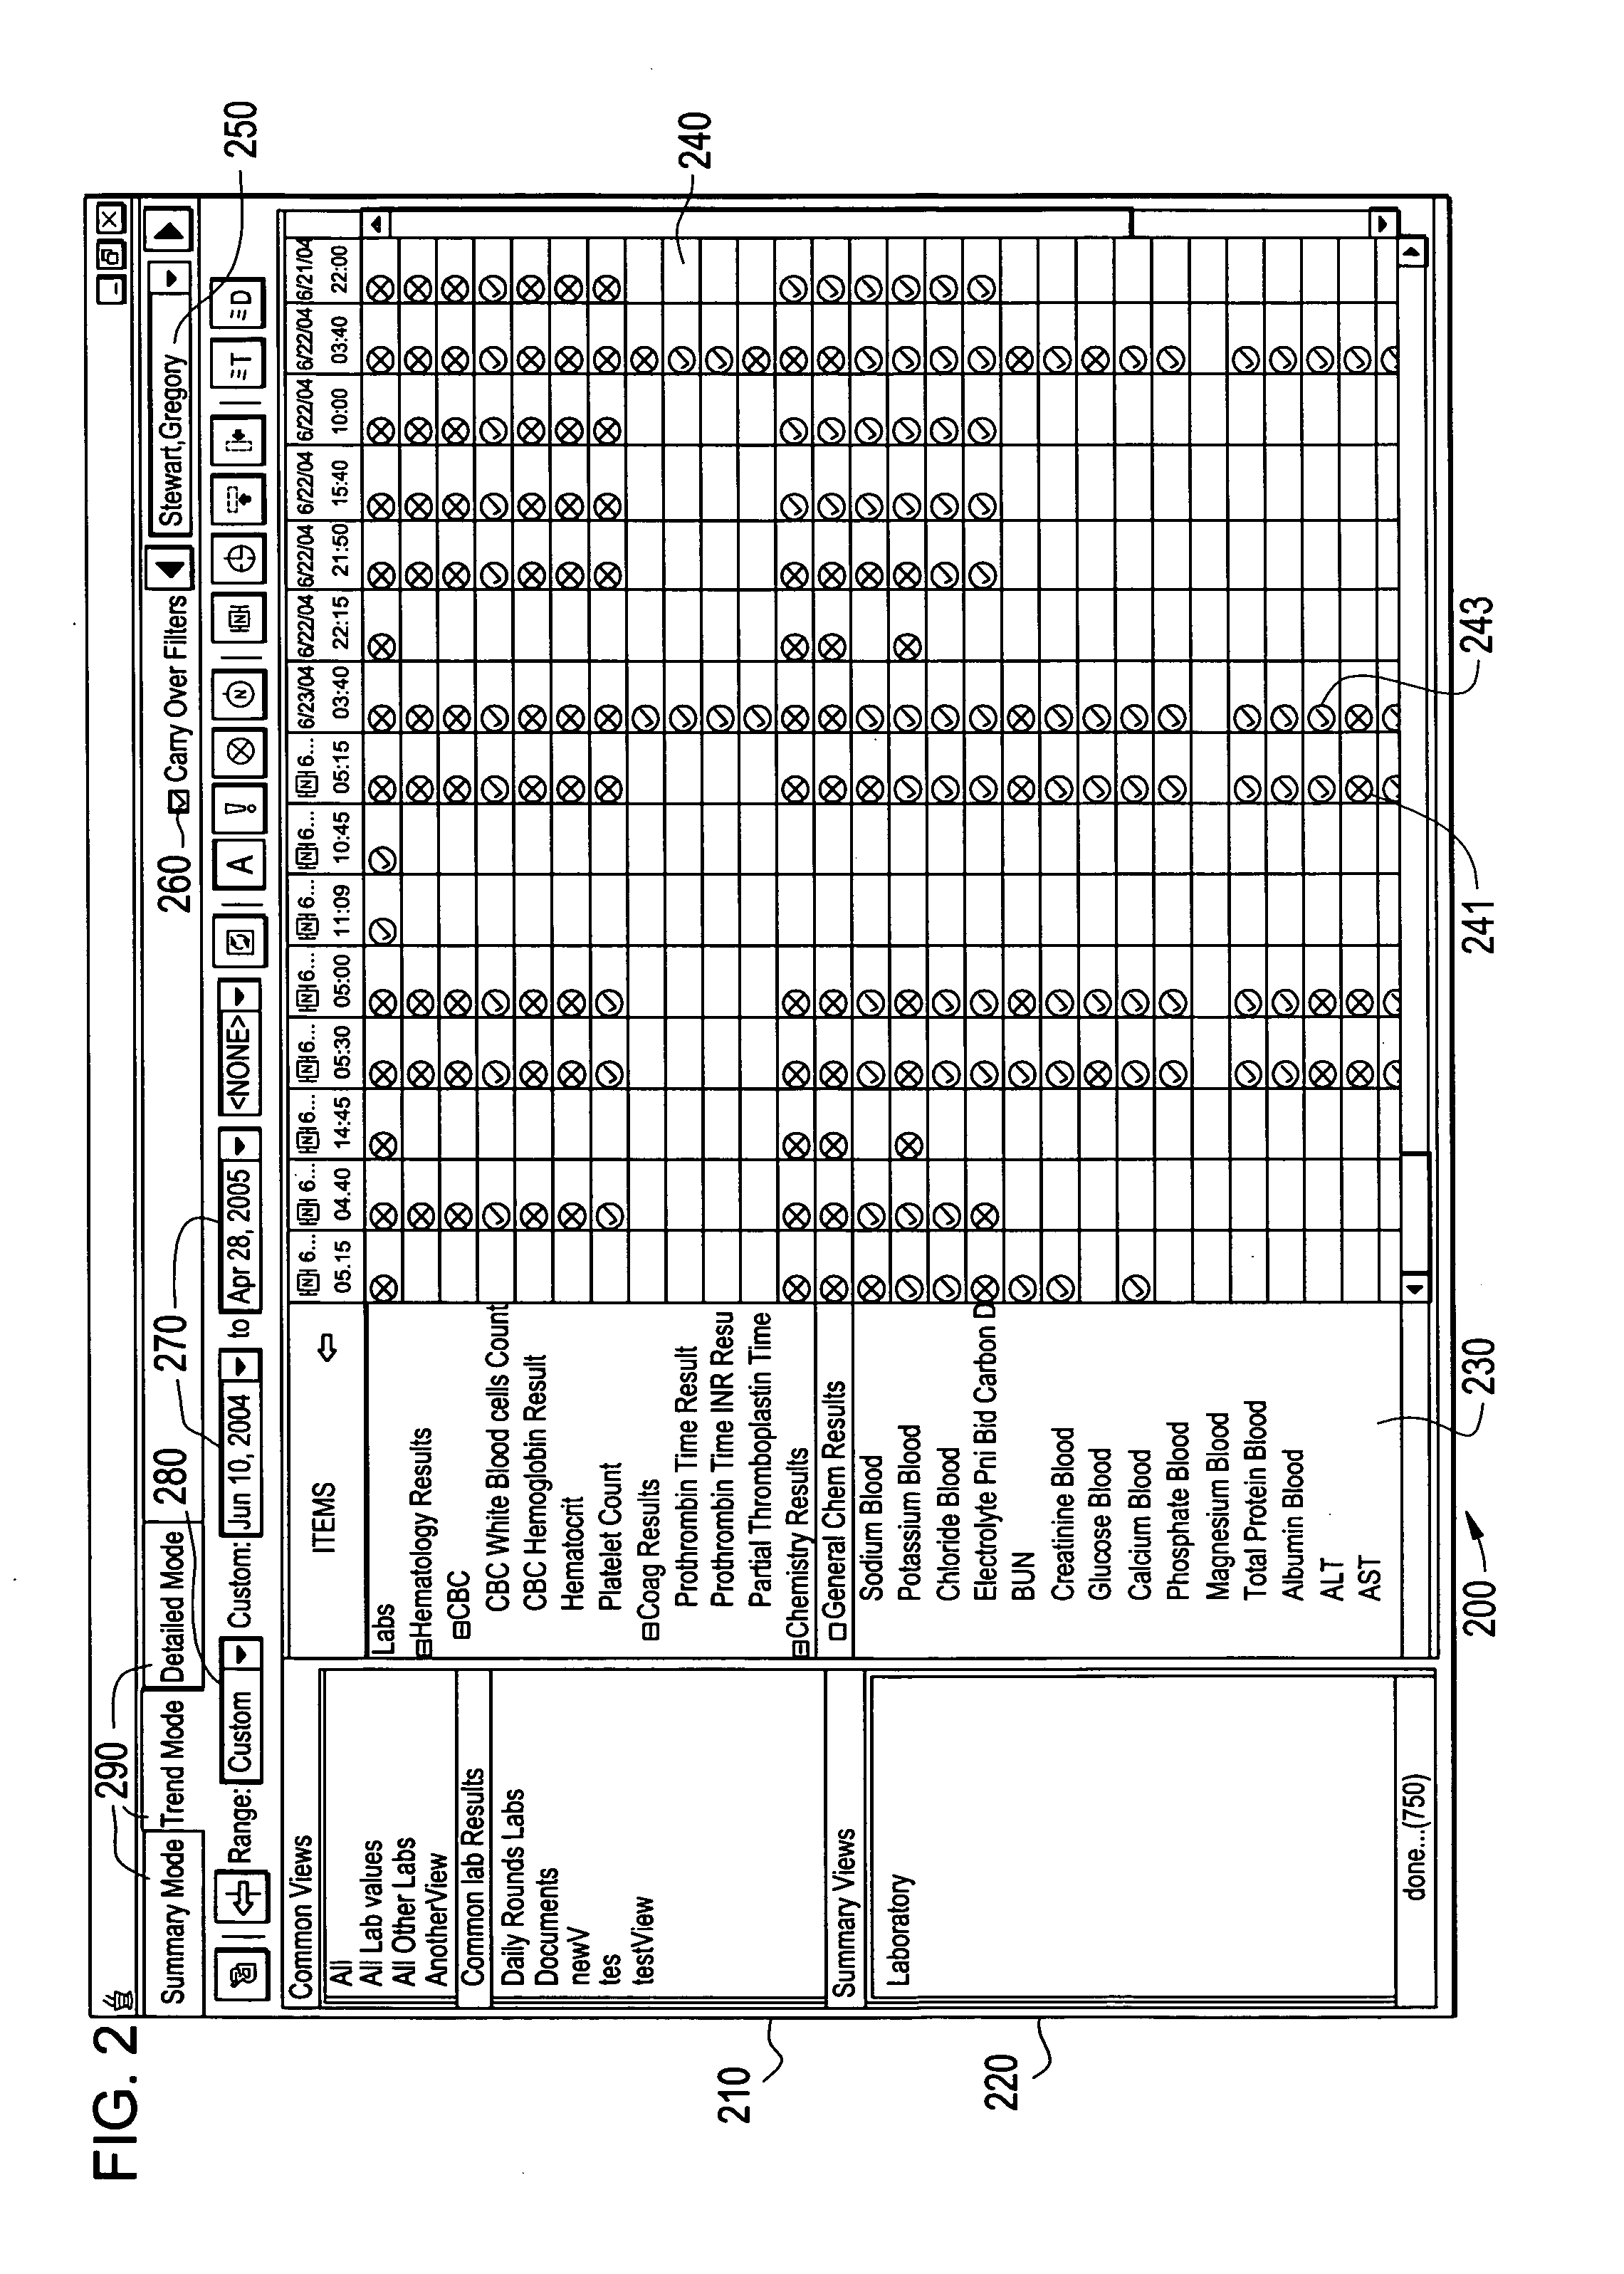 Configurable system and method for results review